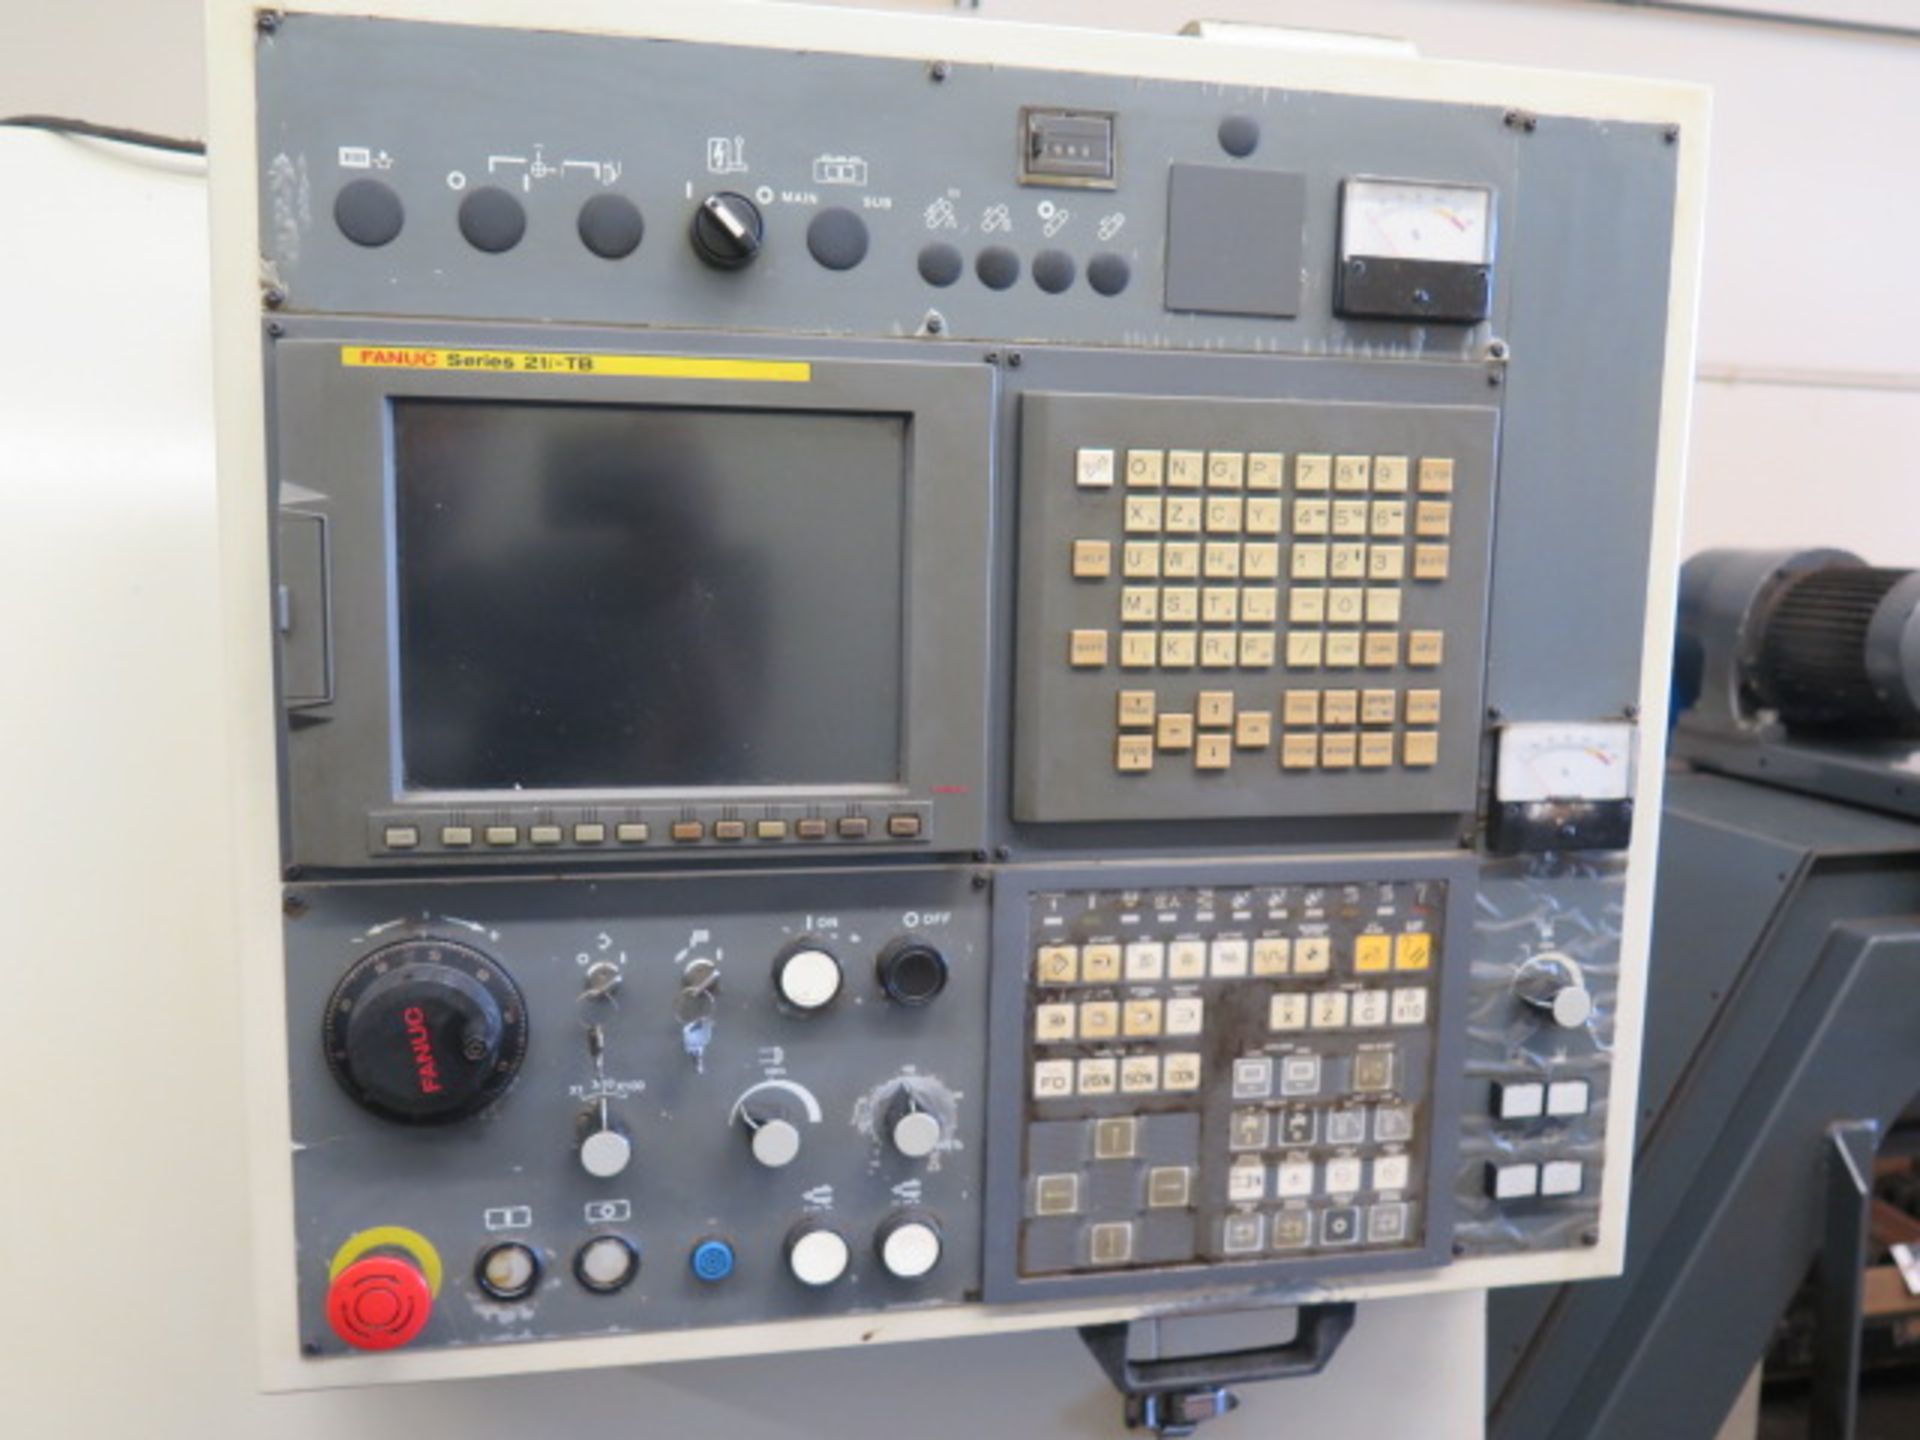 Takisawa-T EX-310 Live Turret CNC Turning Center s/n CW07E40035 w/ Fanuc Series 21i-TB, (SOLD AS IS) - Image 10 of 20